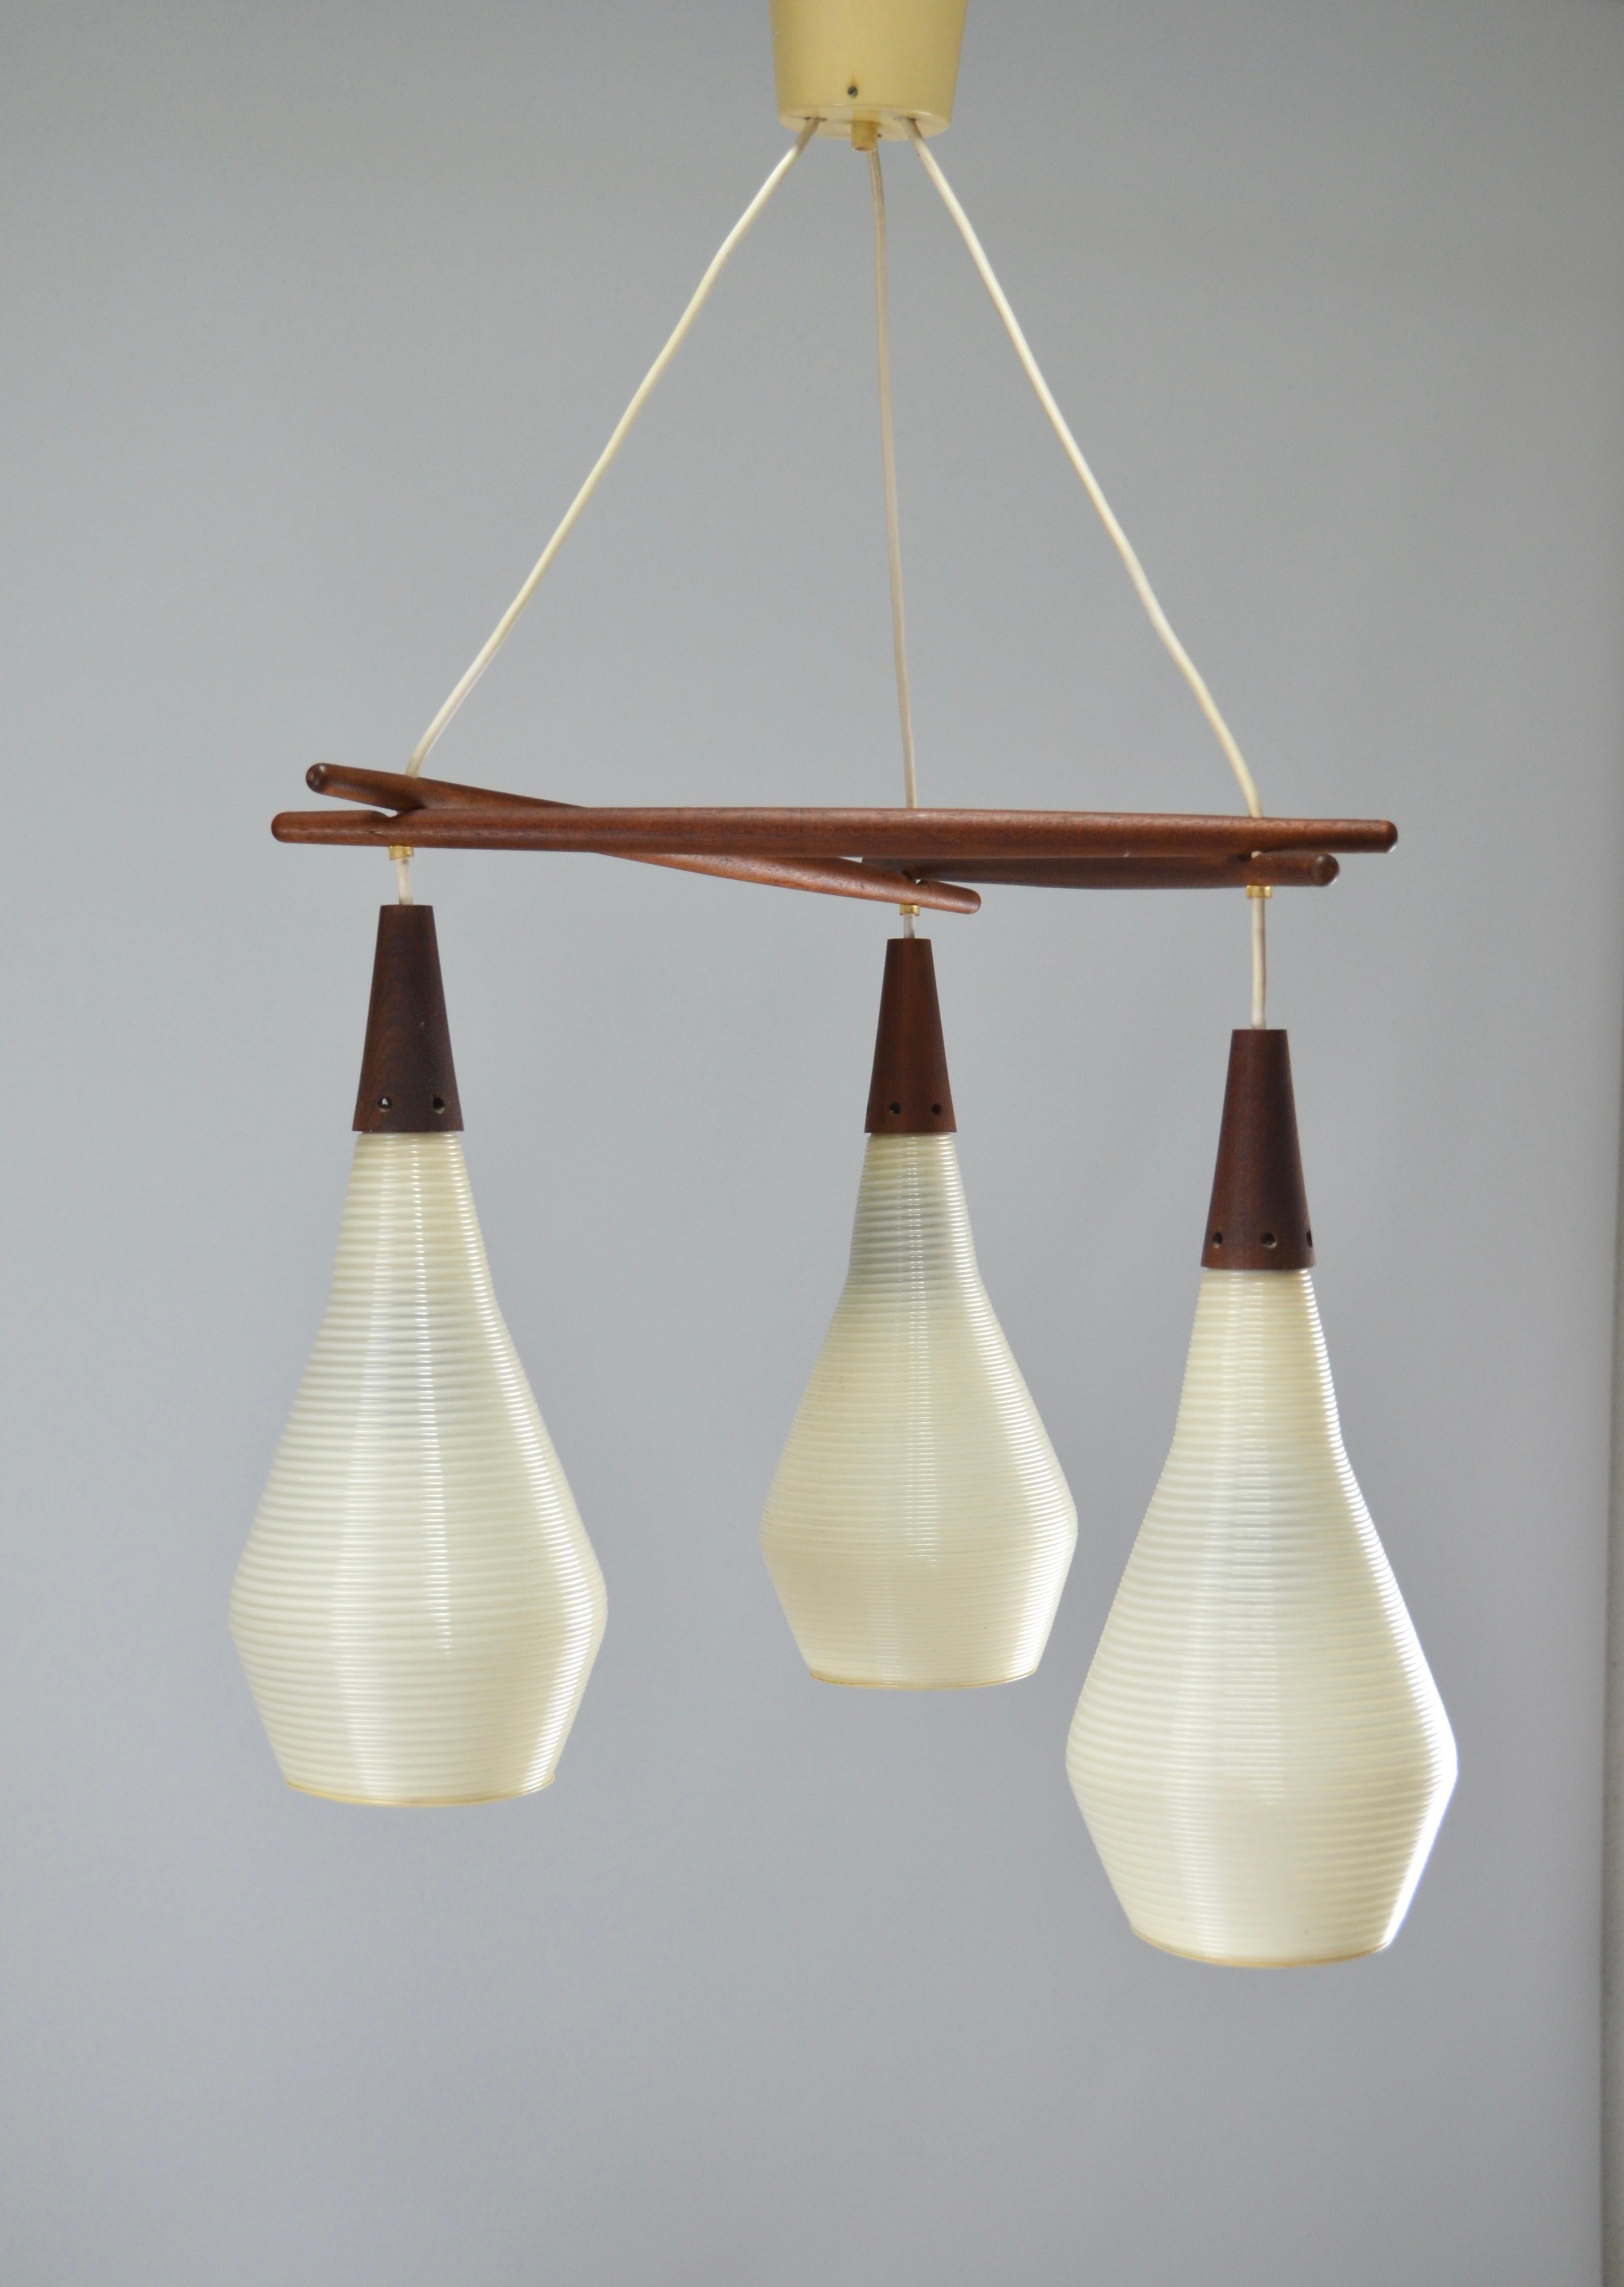 Rare Mid-century ceiling light with rotaflex lamps for Heifetz
The rotaflex globes are in good condition and have a very original shape. Very beautiful diffused light.
They are topped with wooden cones.
The teak structure has beautiful finishes.
